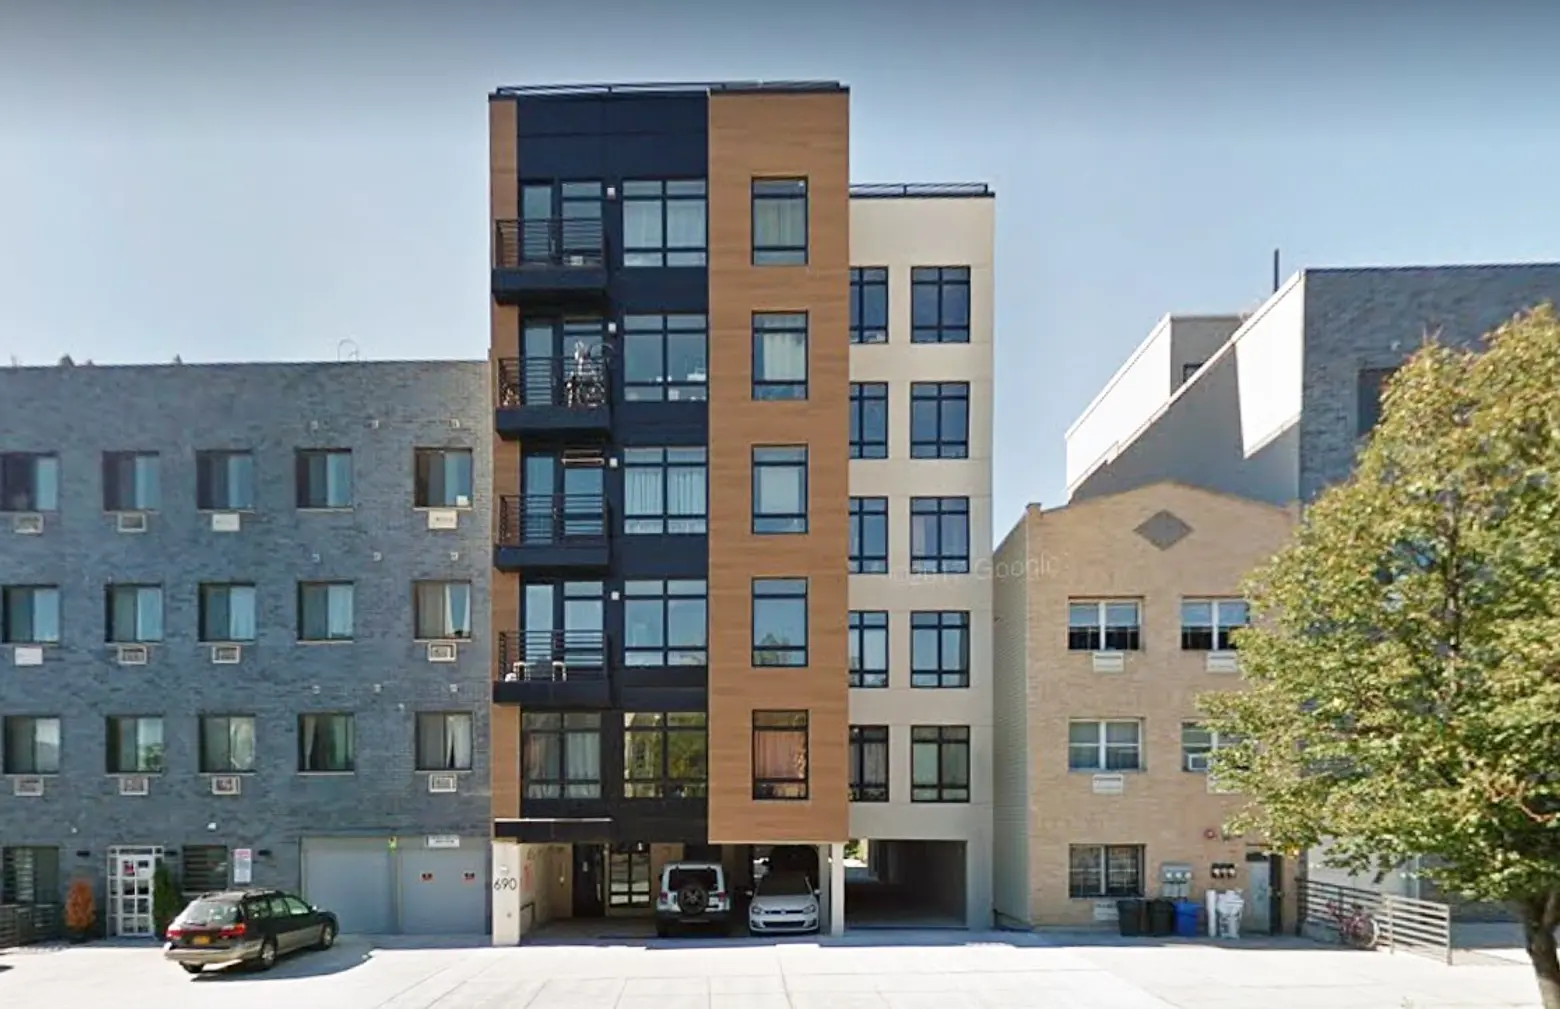 Six middle-income apartments up for grabs in prime Bushwick